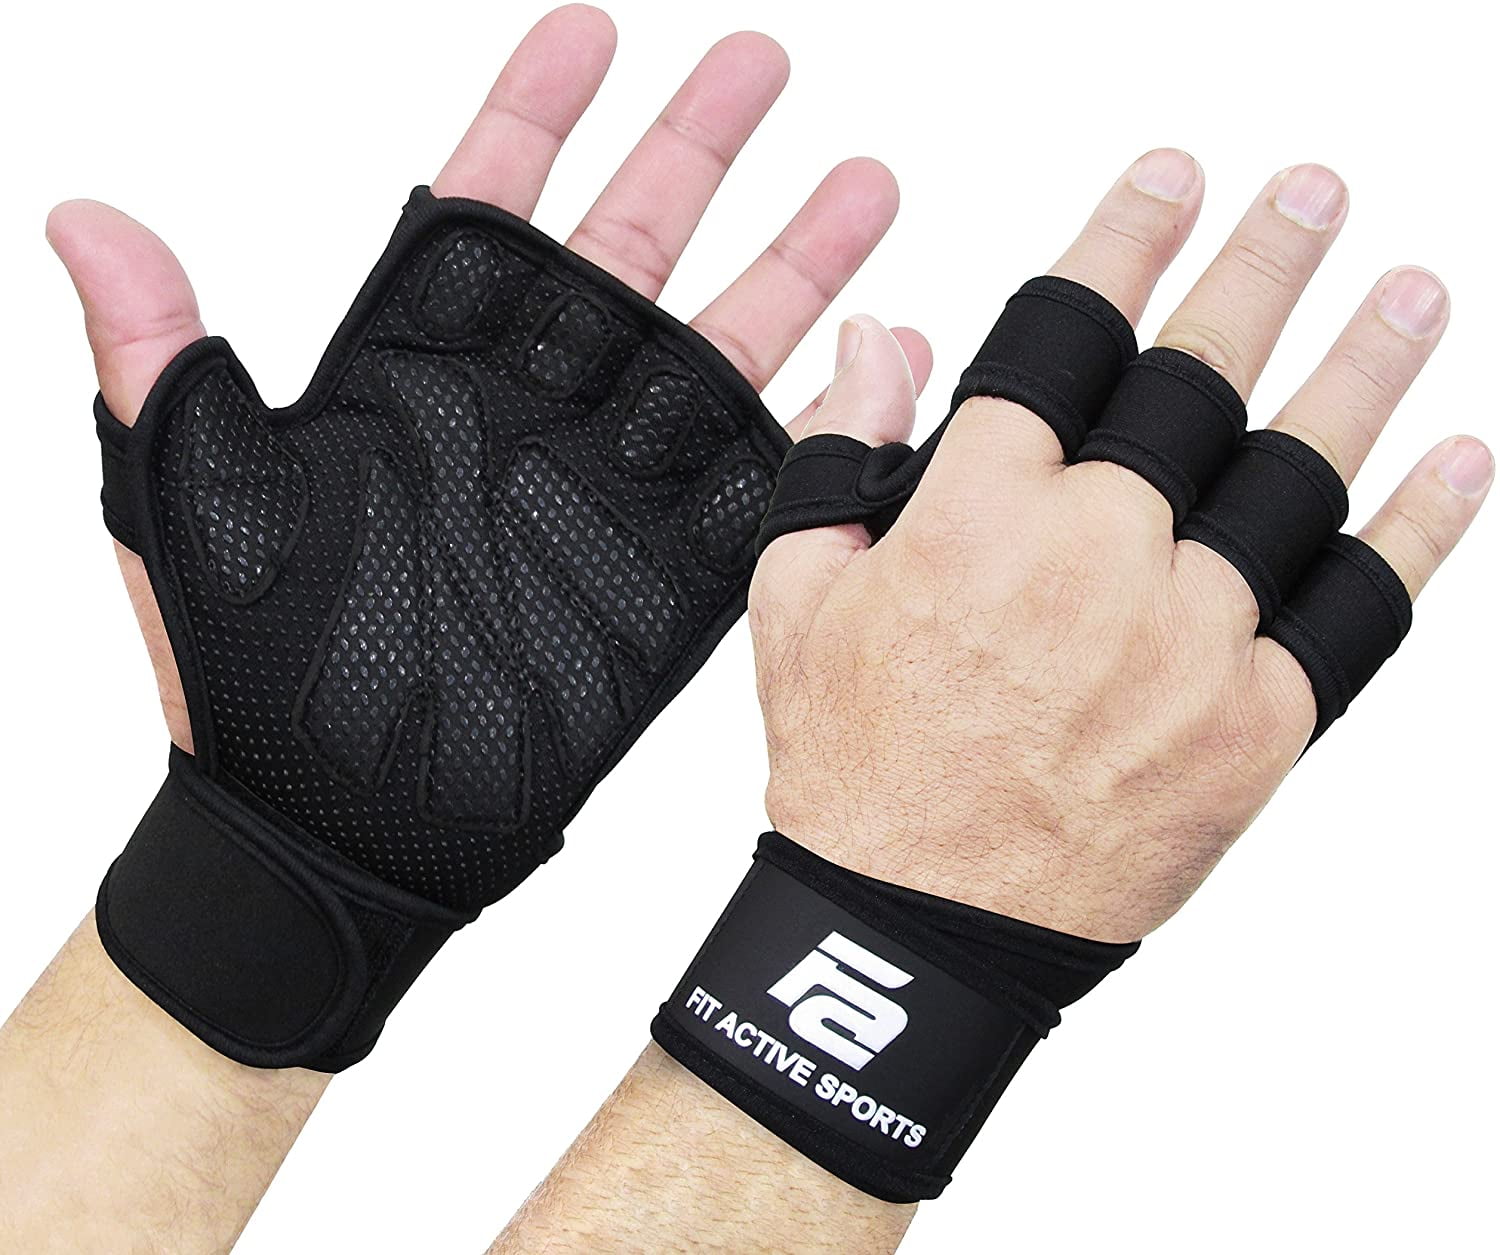 Weight Lifting Training Gym Armor Raptor Hook Grips Straps Gloves Wrist Support 